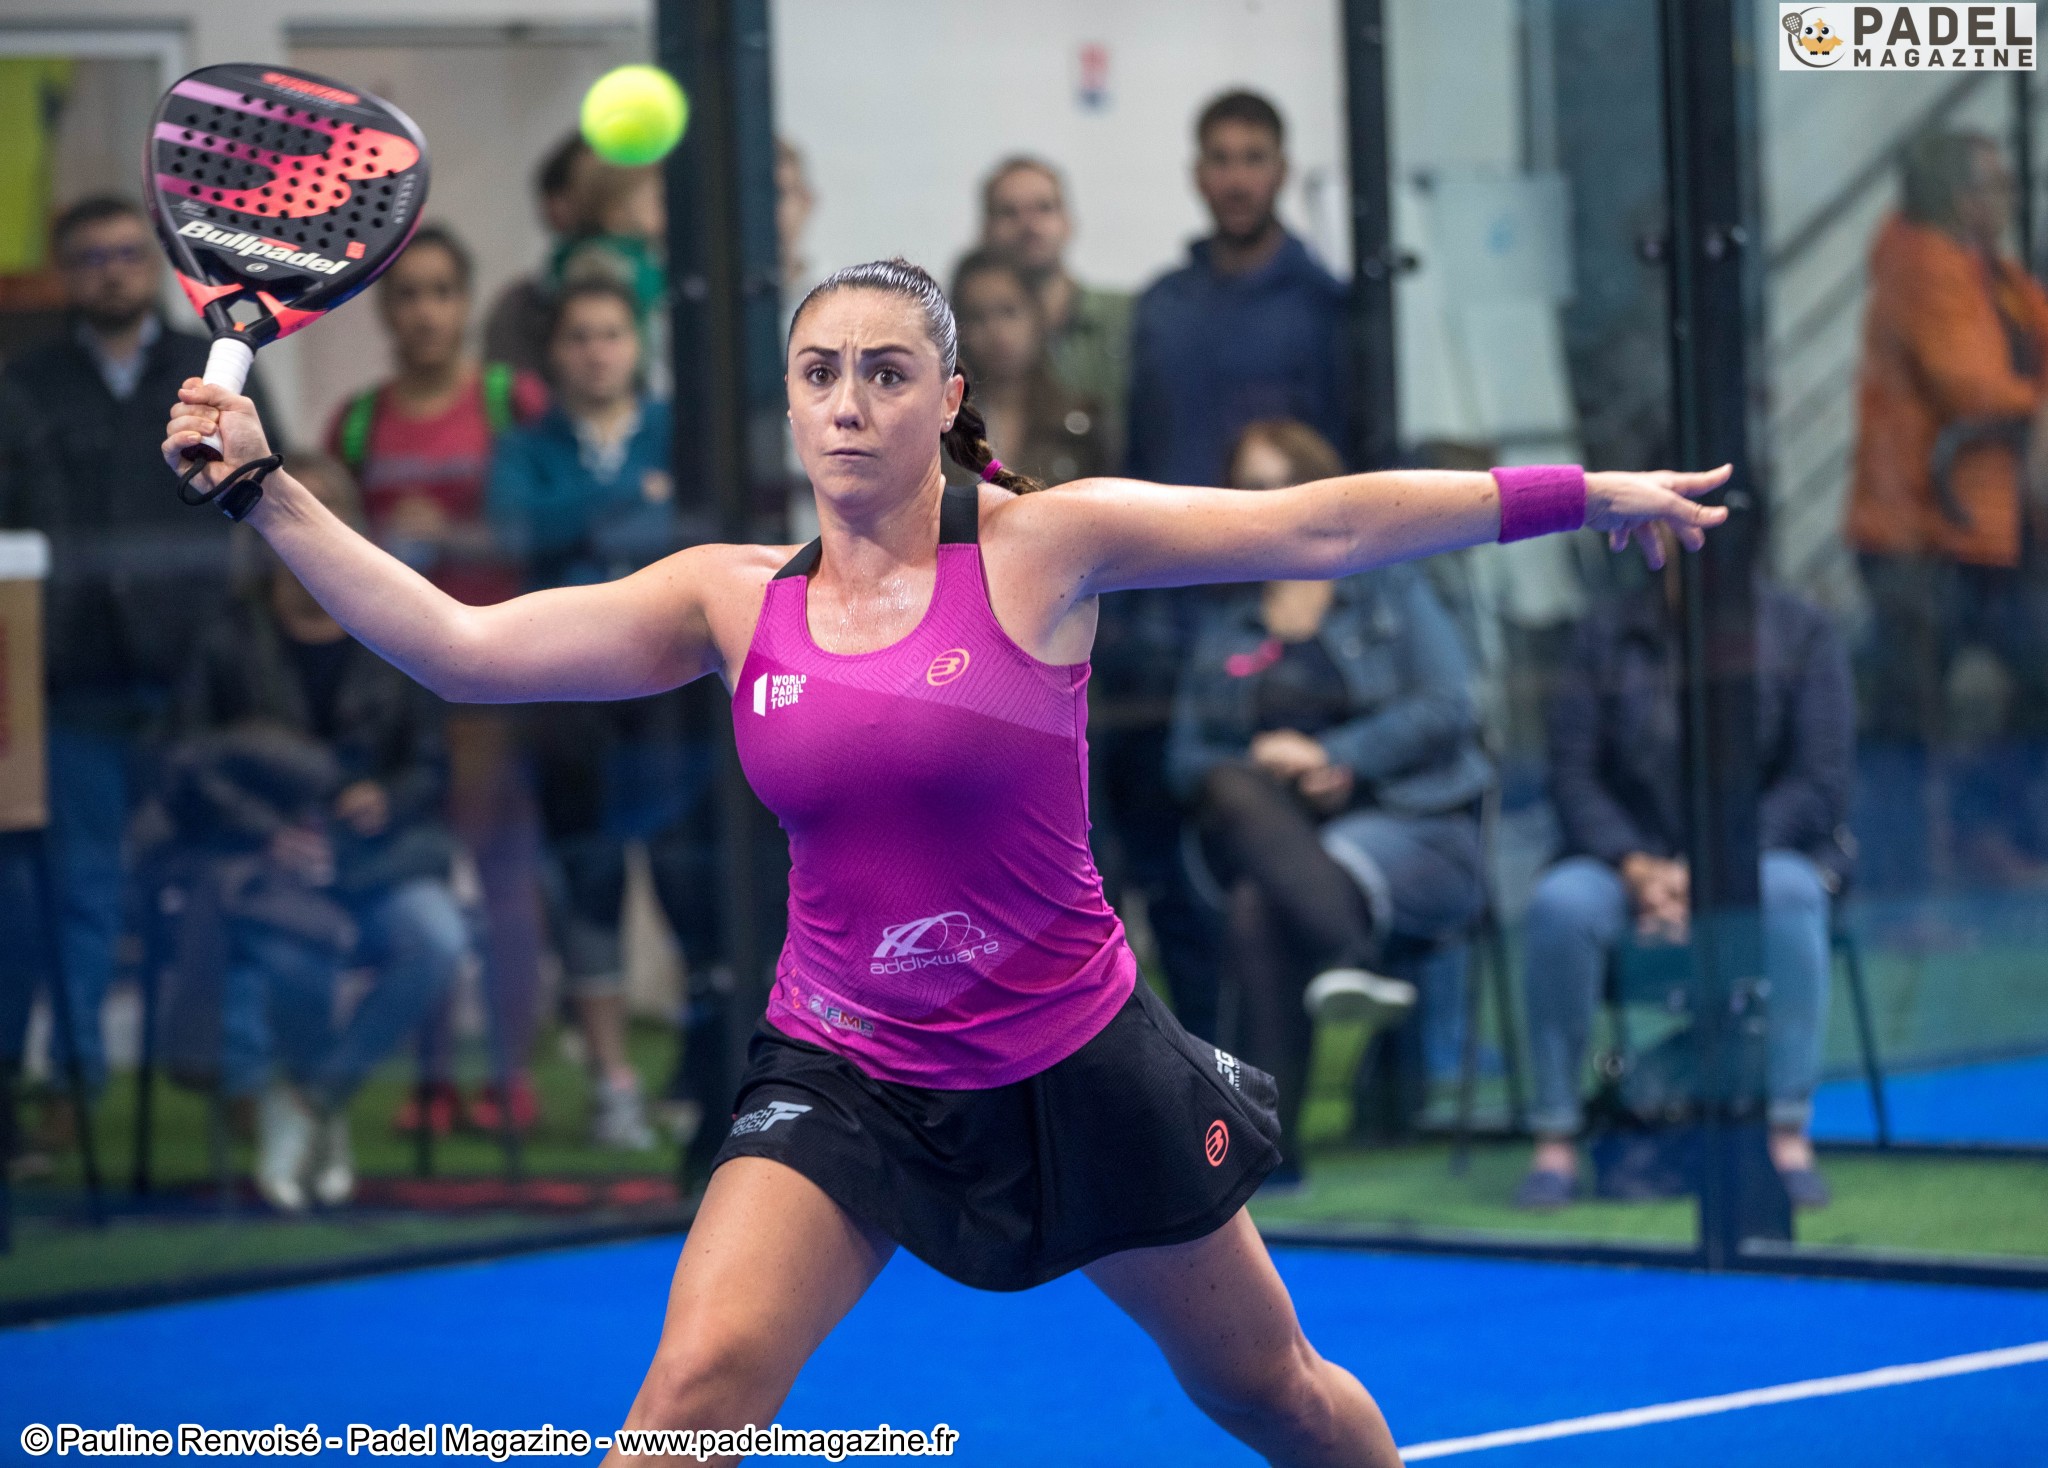 Laura Clergue returns to the main draw